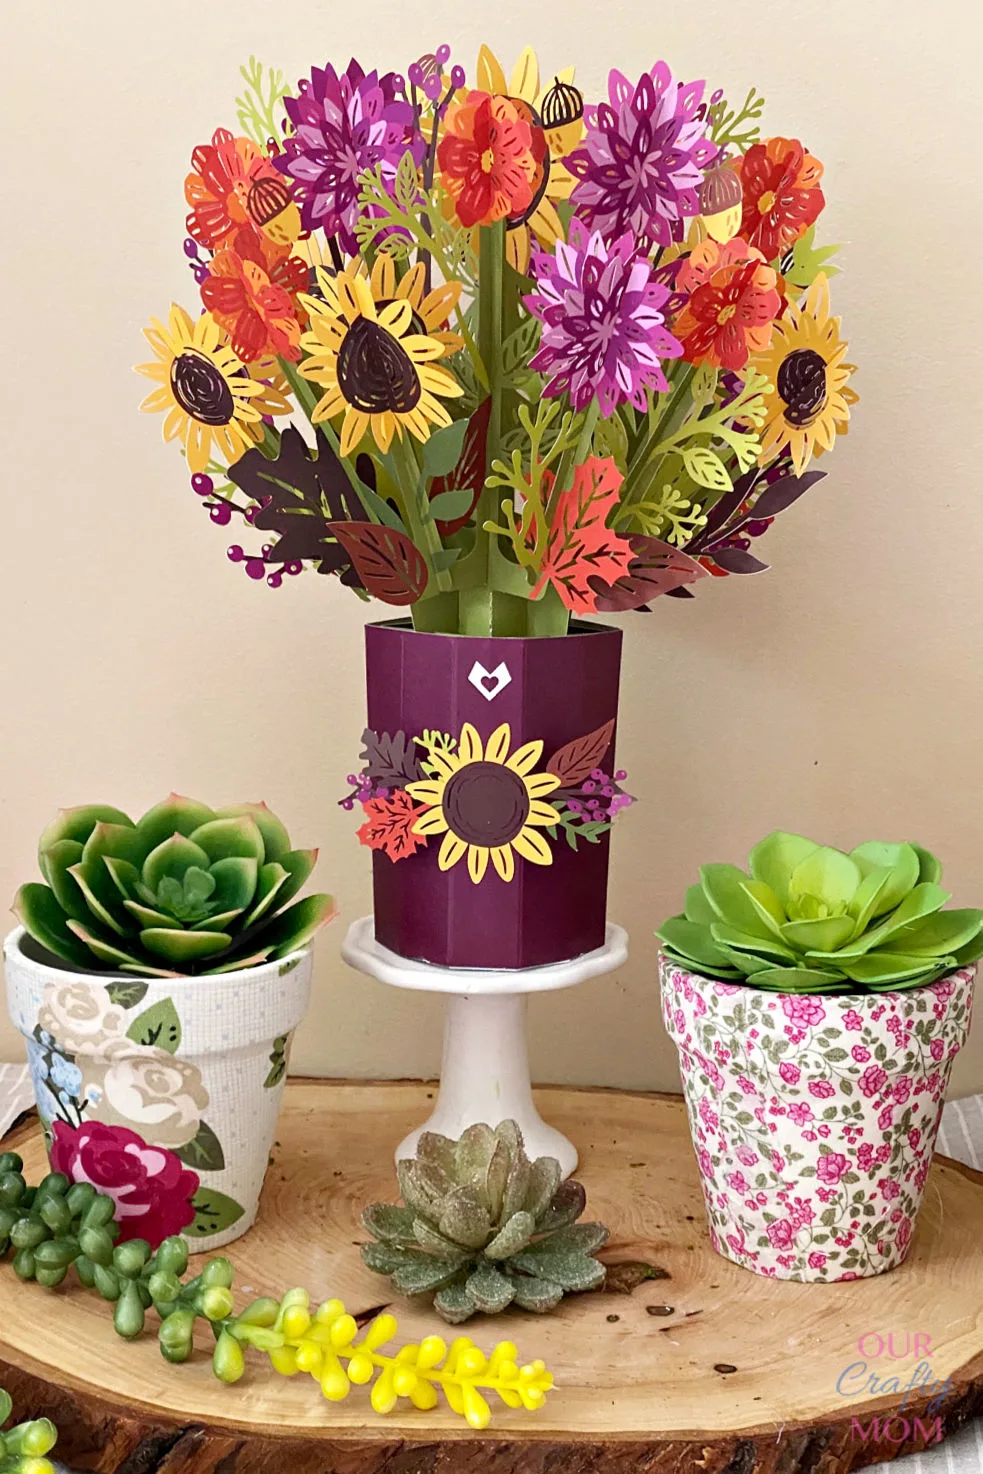 Give a Stunning Pop-Up Paper Flower Bouquet That Will Wow!